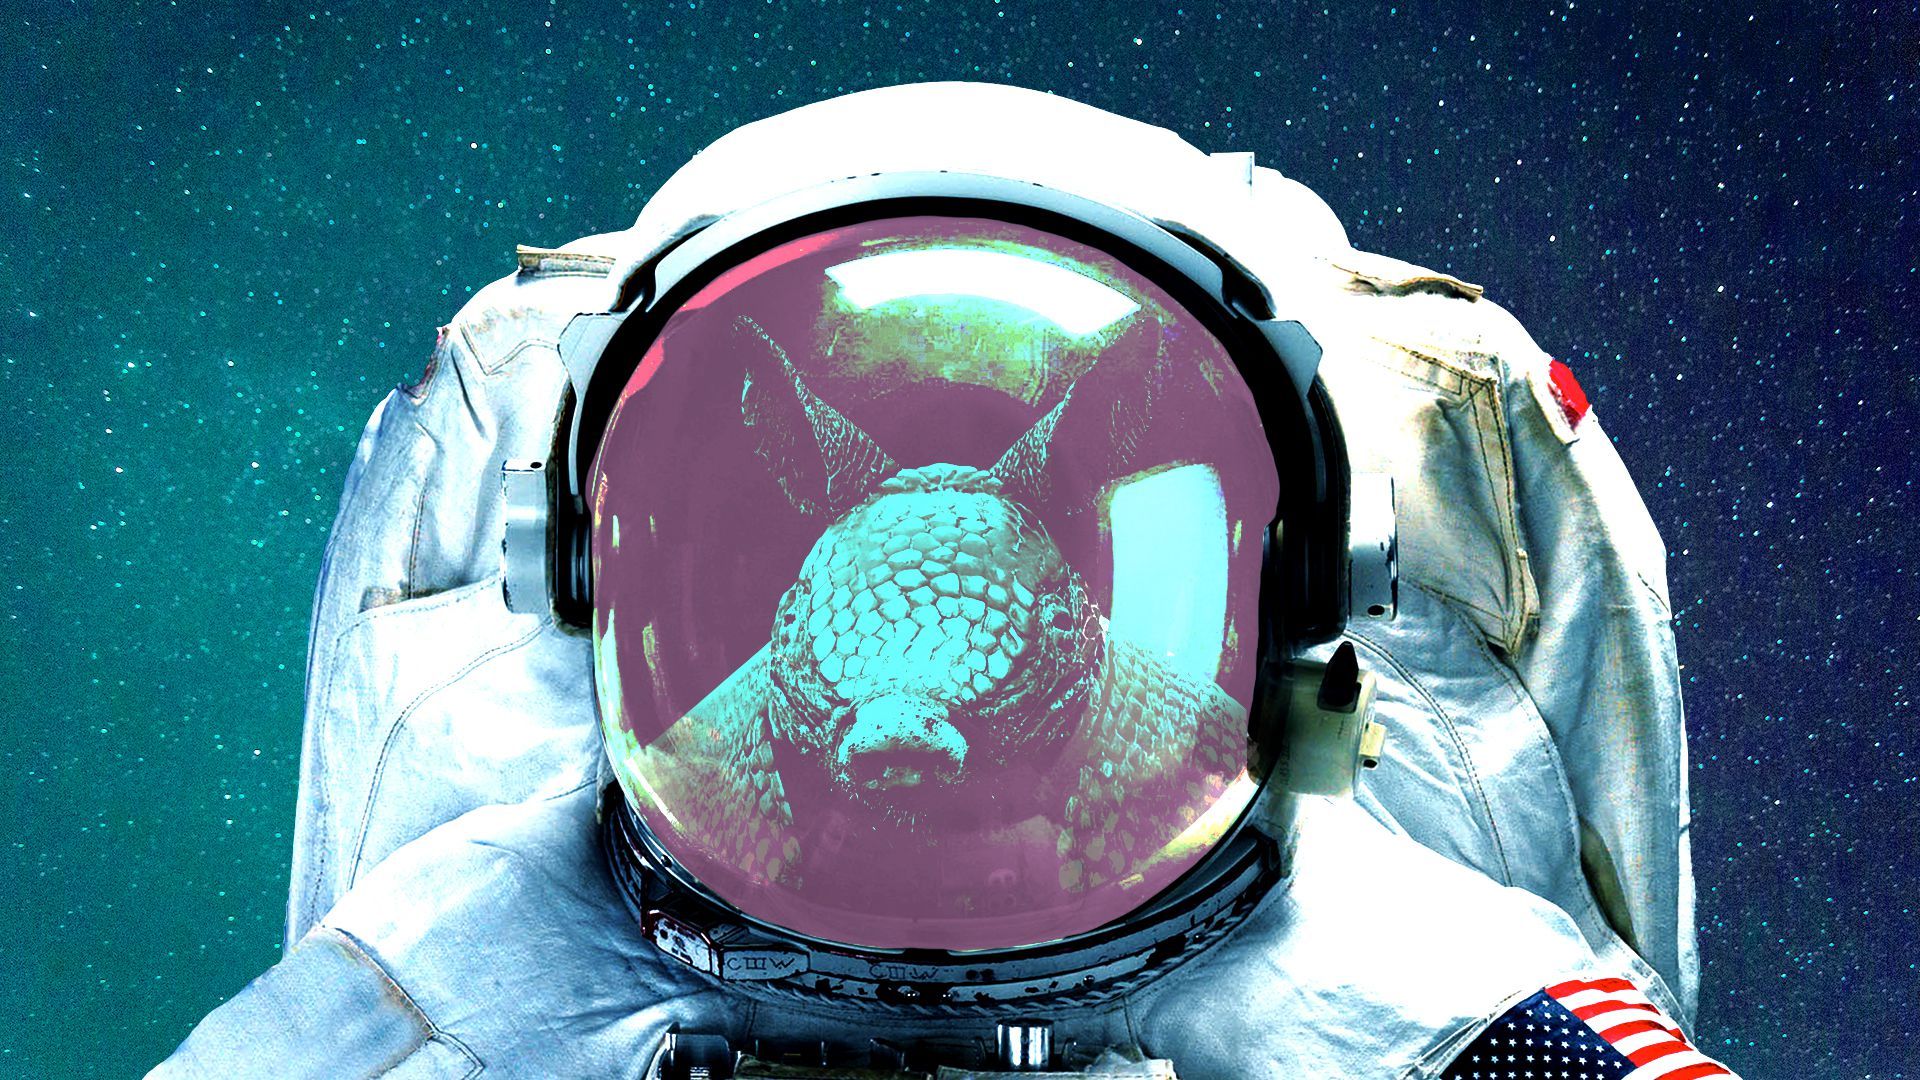 Illustration of an armadillo wearing an astronaut's space suit.